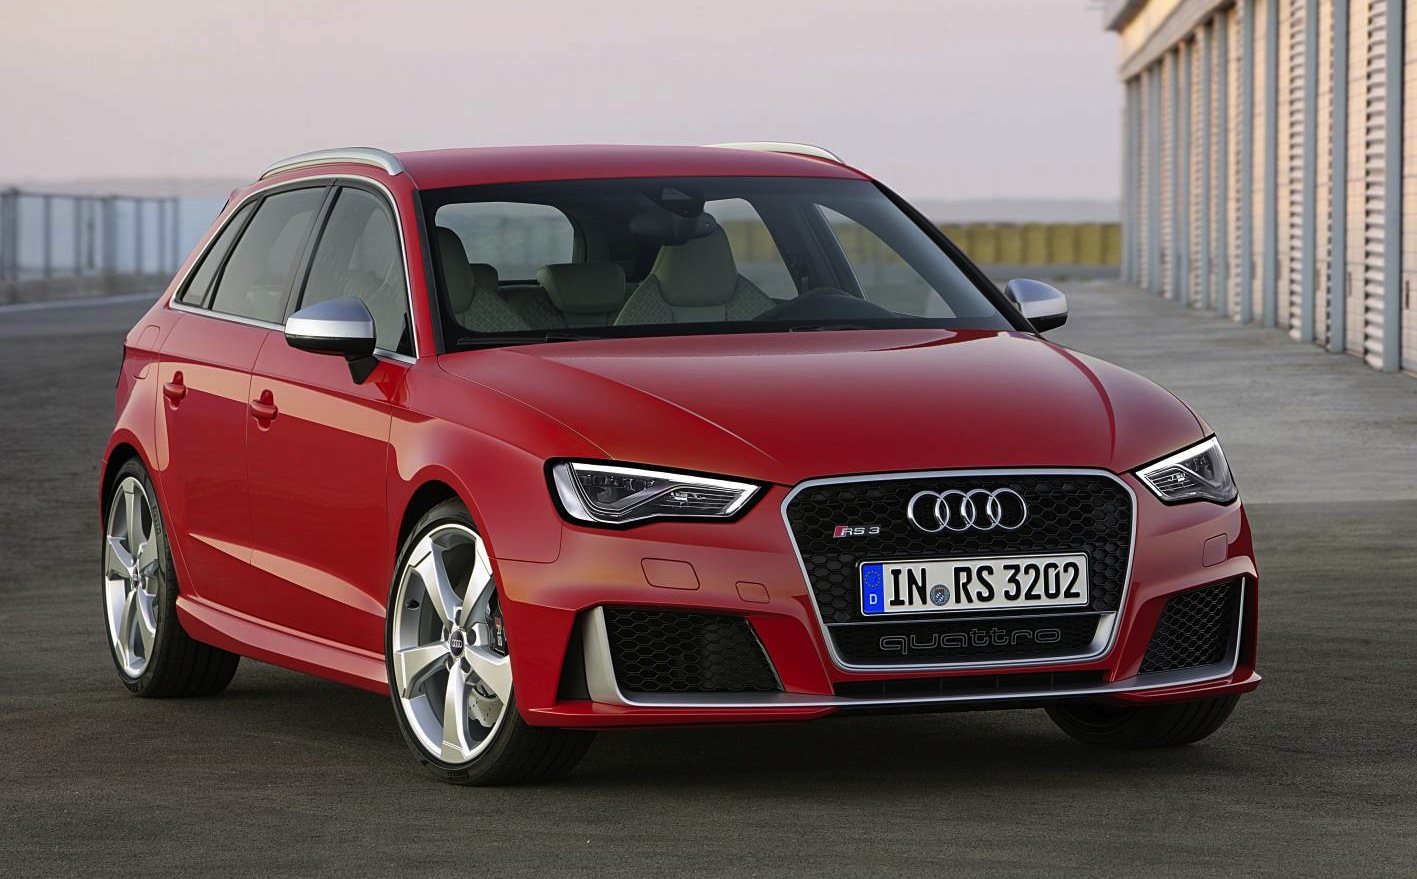 2015 Audi RS 3 Sportback becomes quickest, most powerful hatch ever